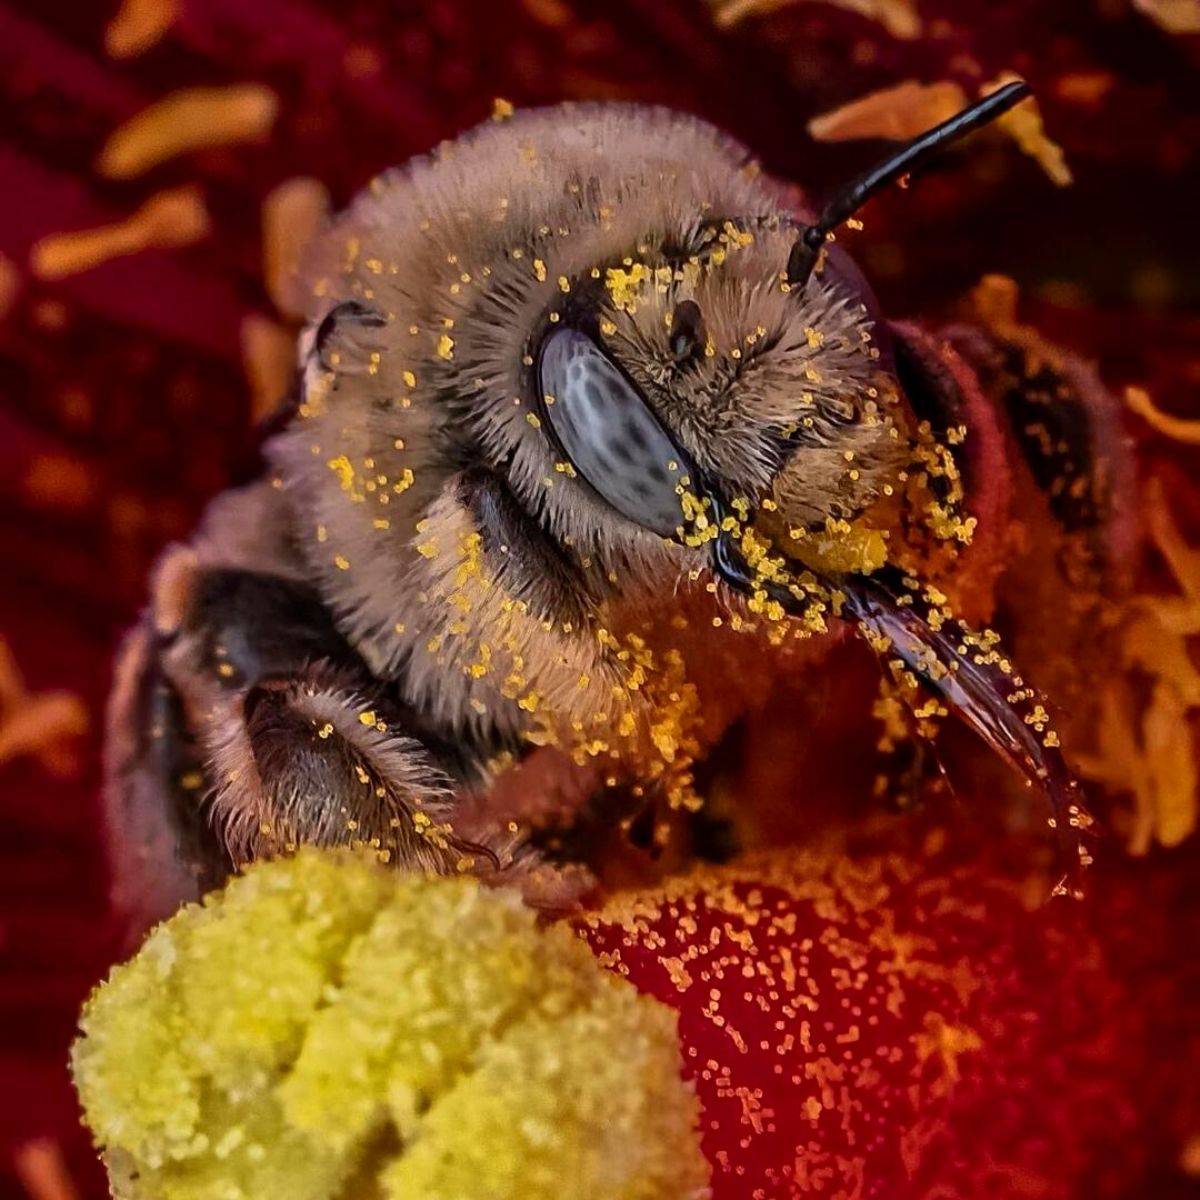 Closeup of a pollinated bee